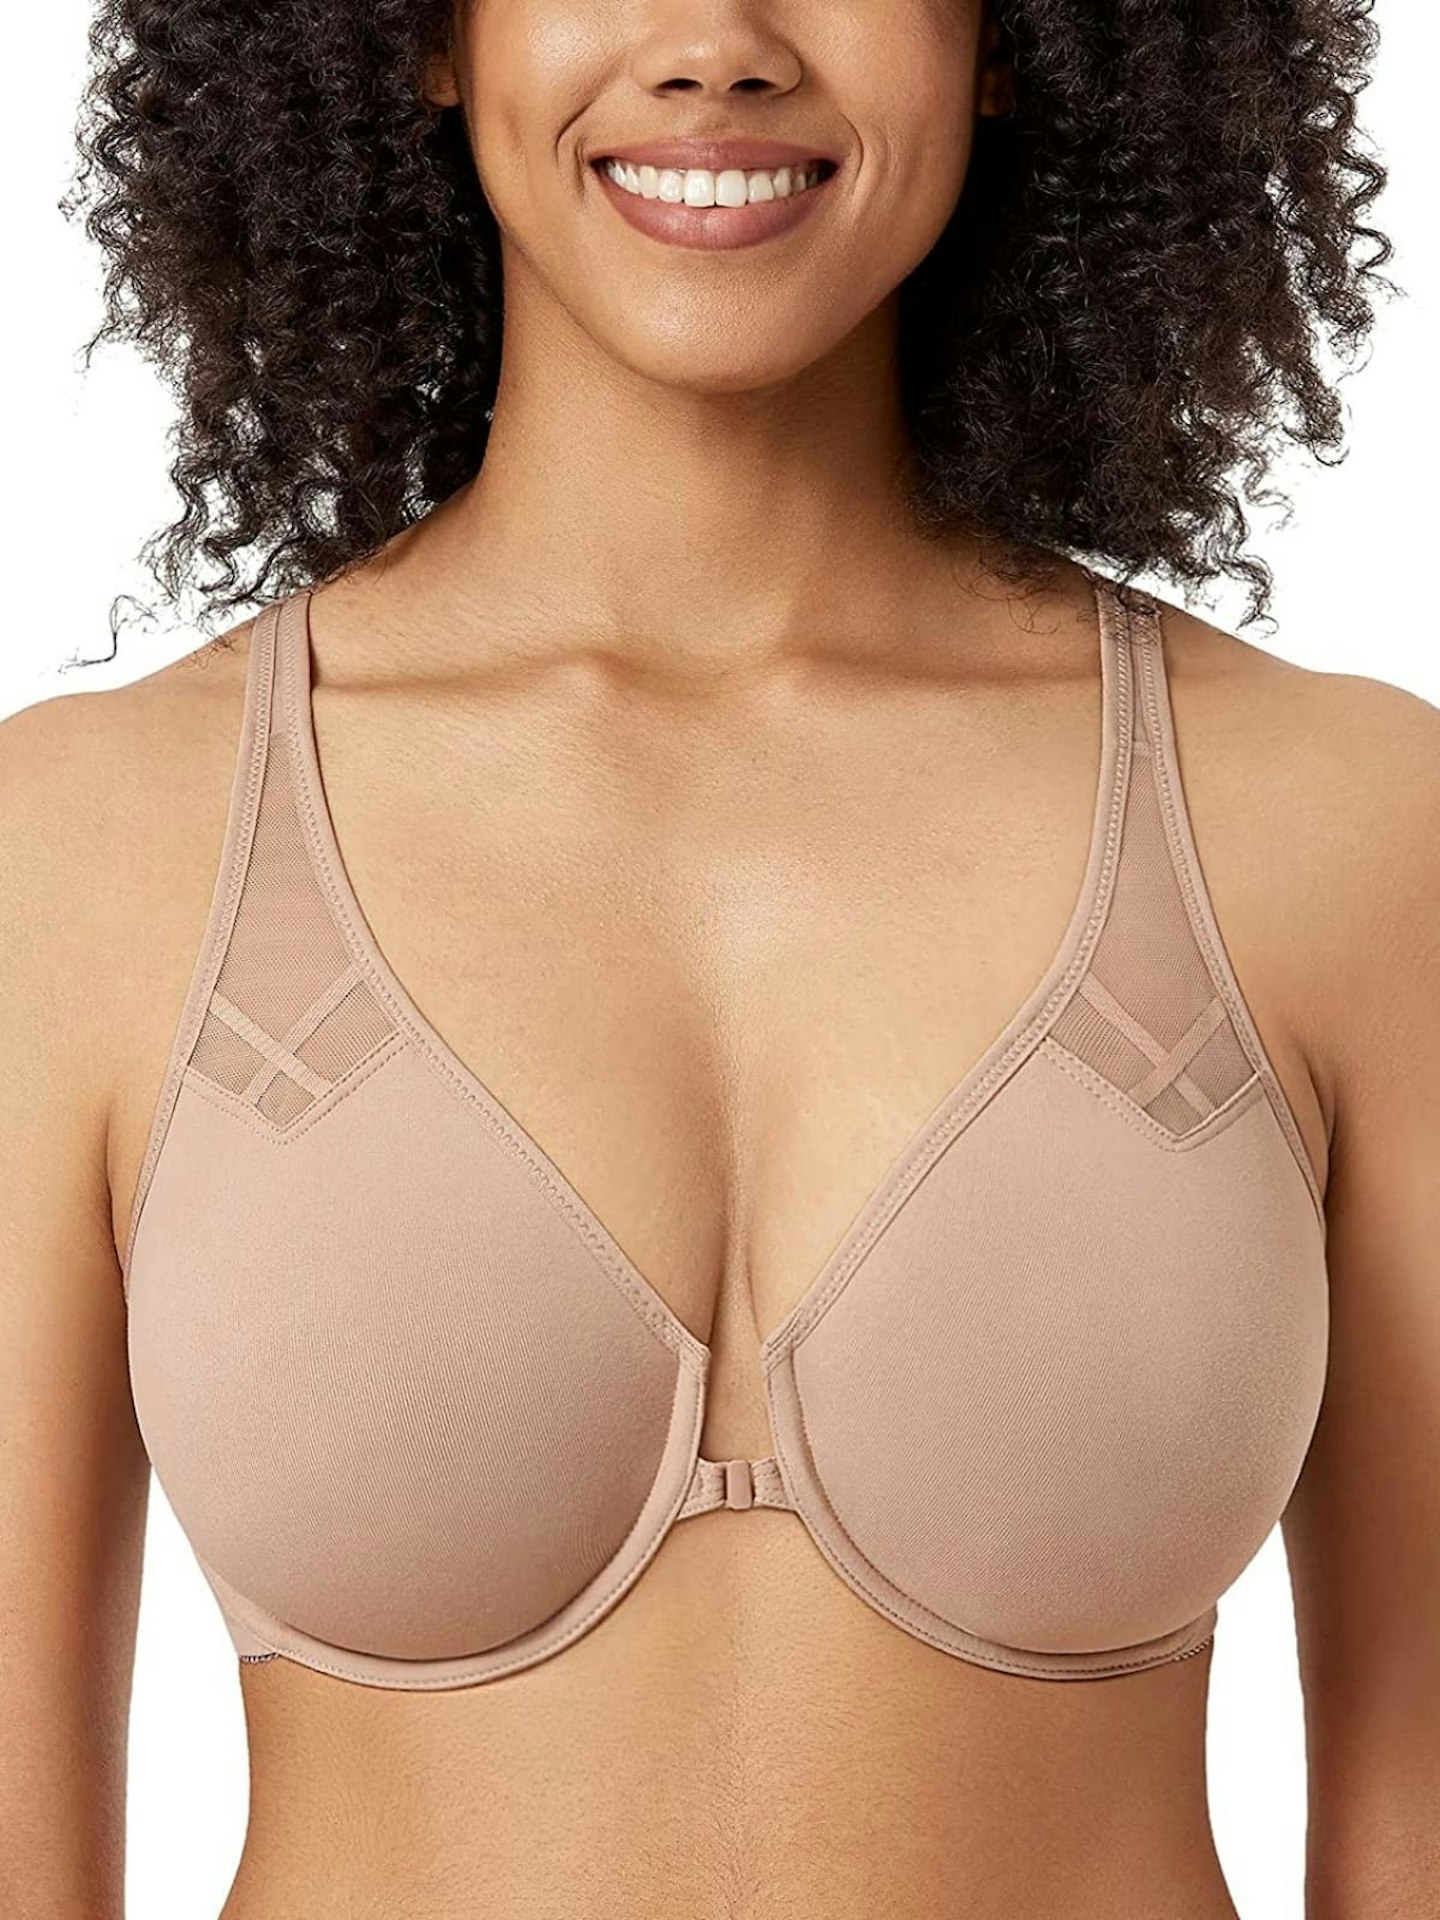 The TikTok strapless bra hack that will save you every time